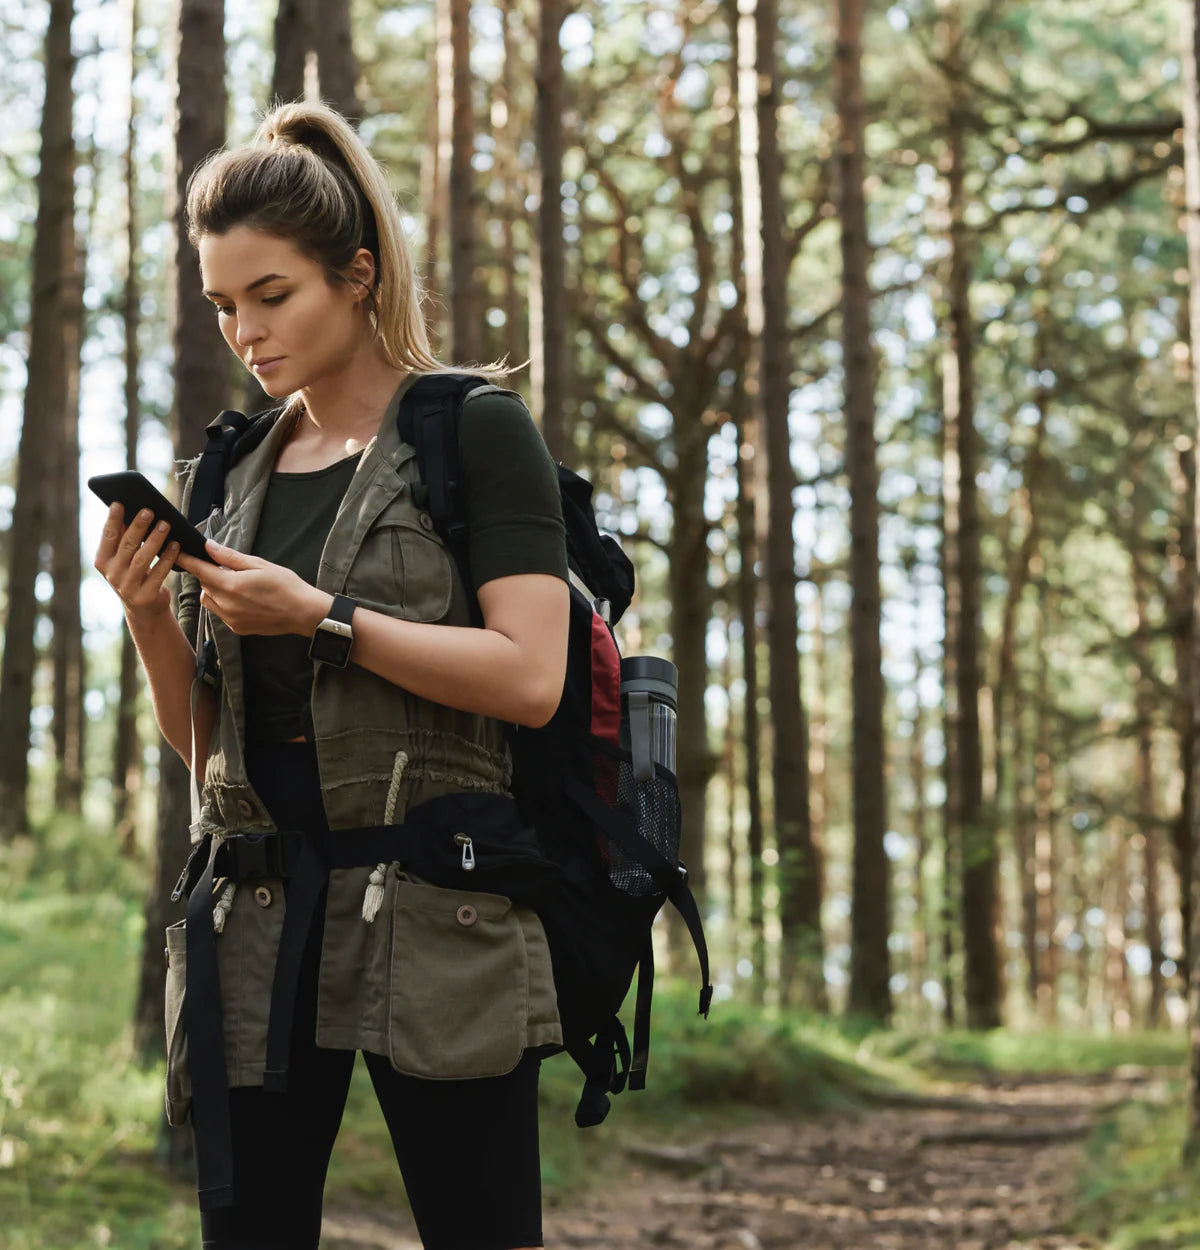 Woman checking her phone while hiking